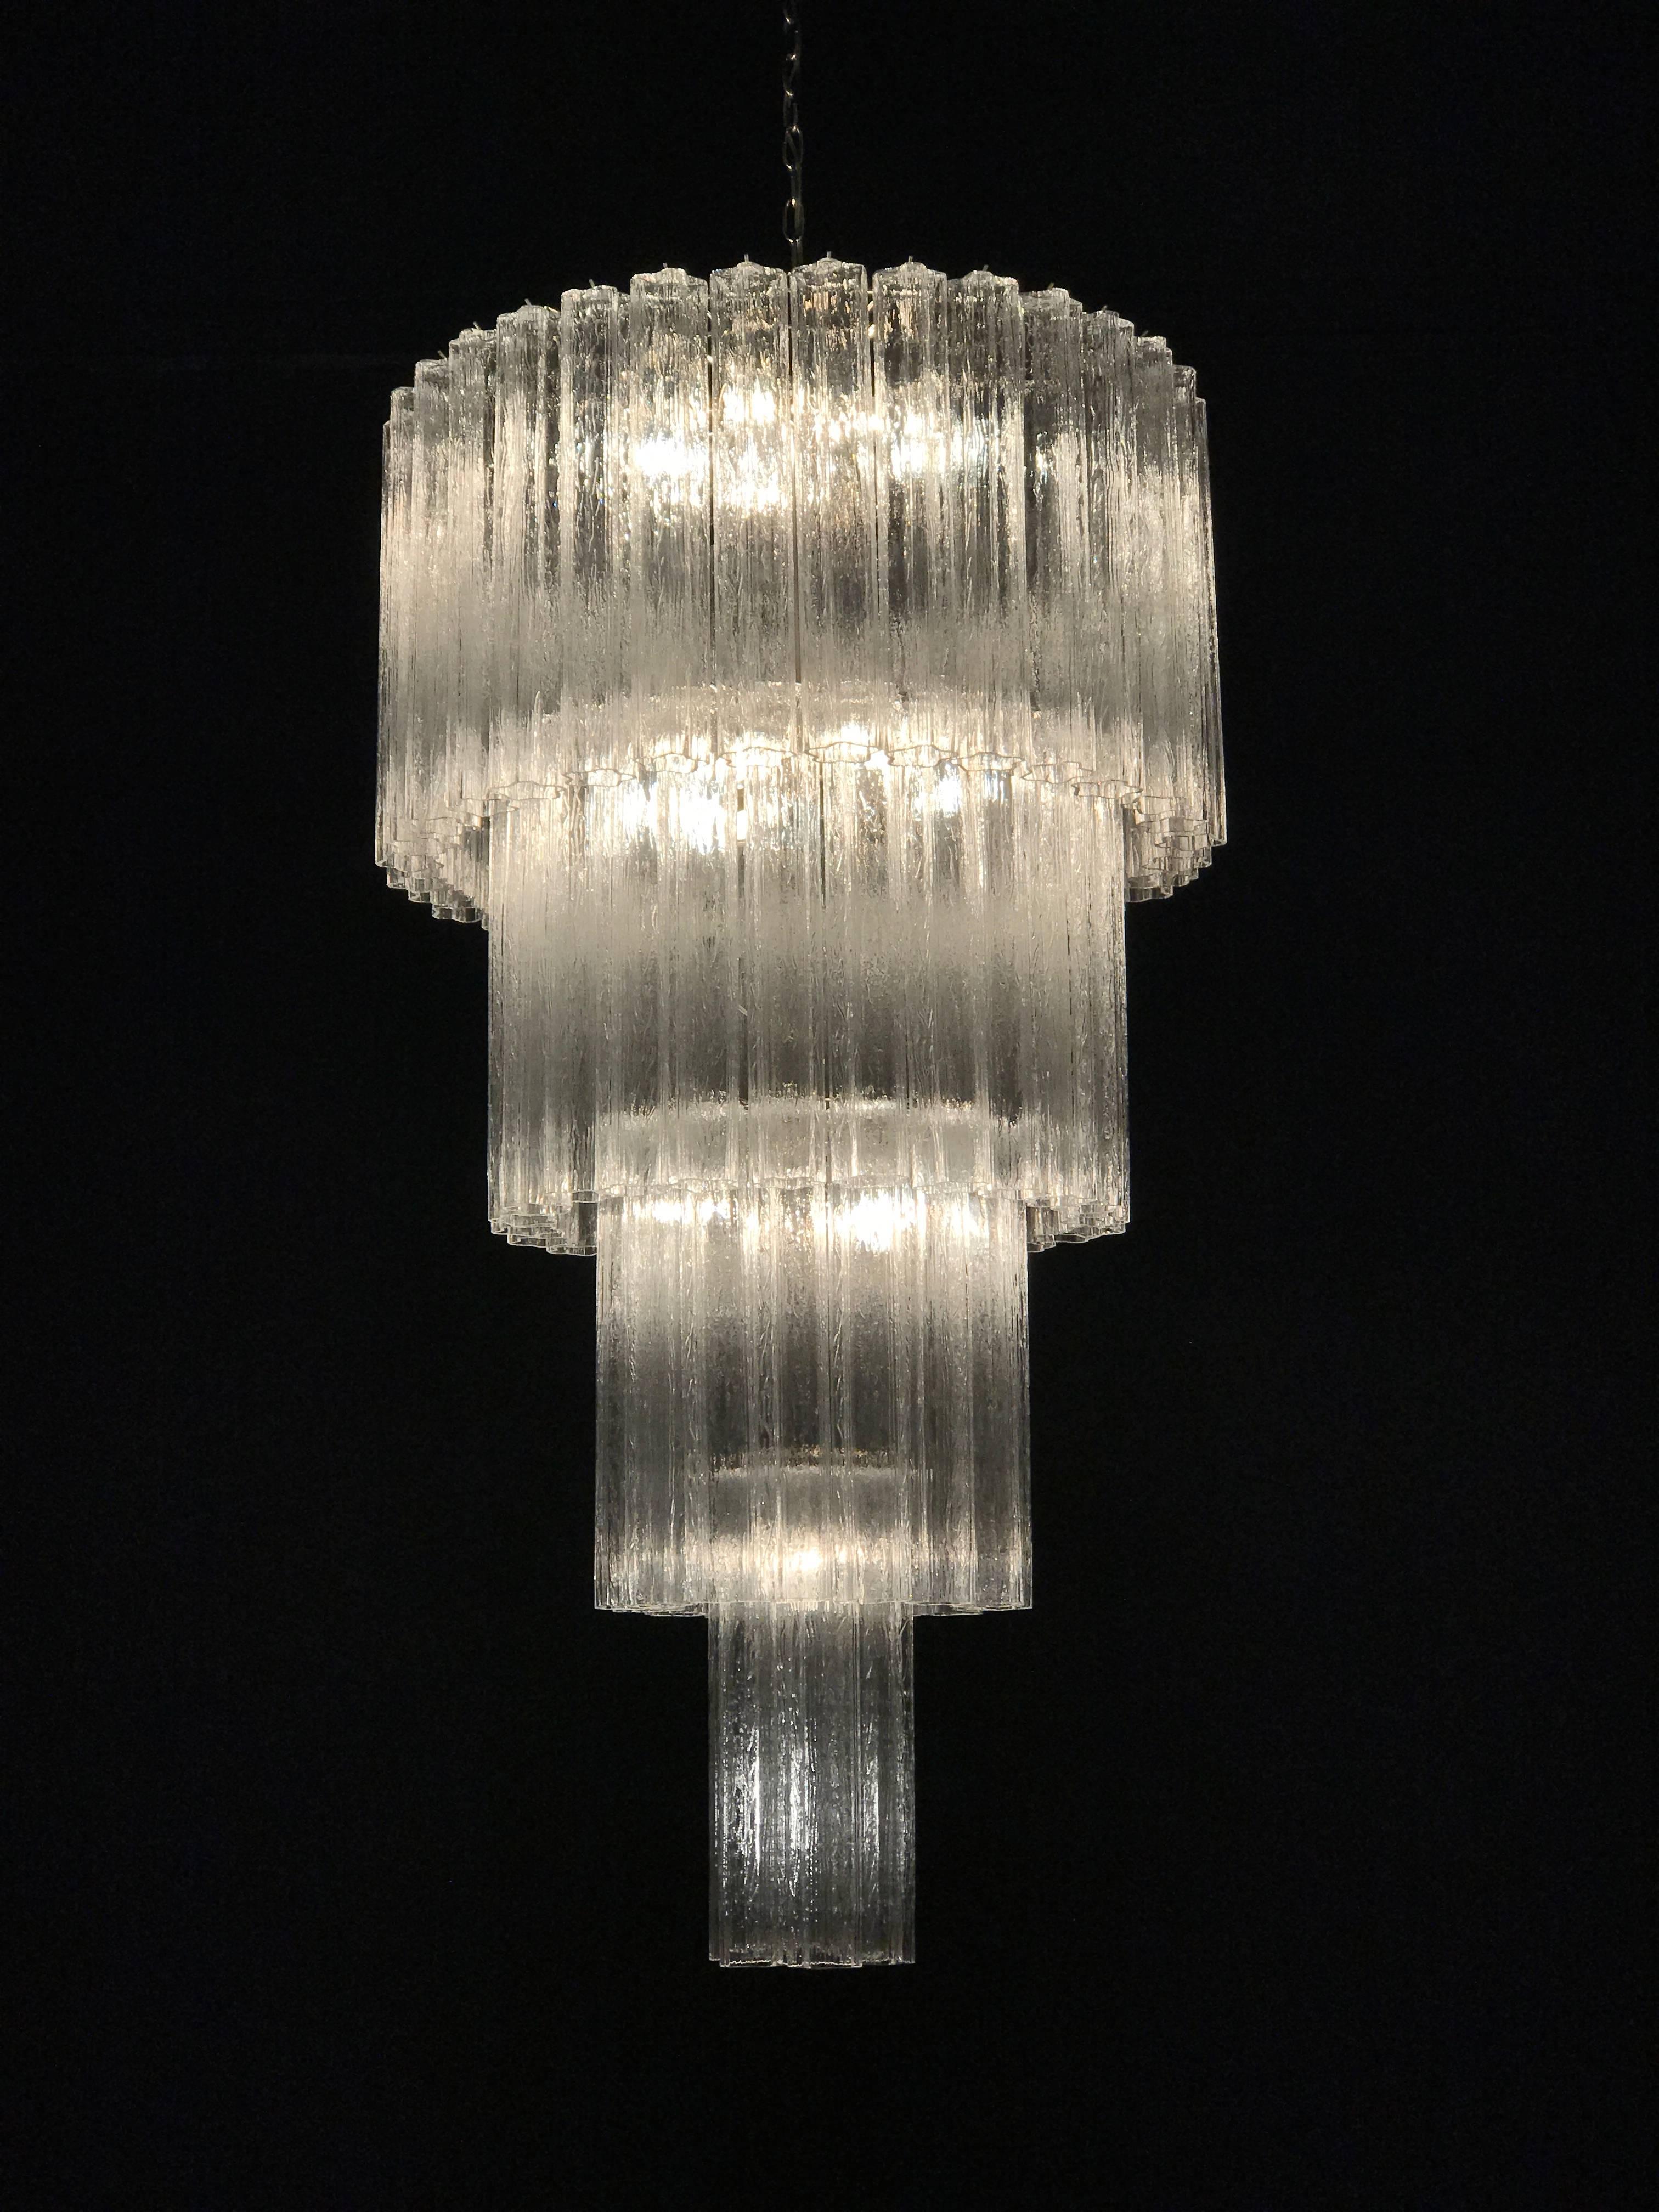 Pair of Monumental Italian Tronchi Chandeliers Murano, 1980s For Sale 1